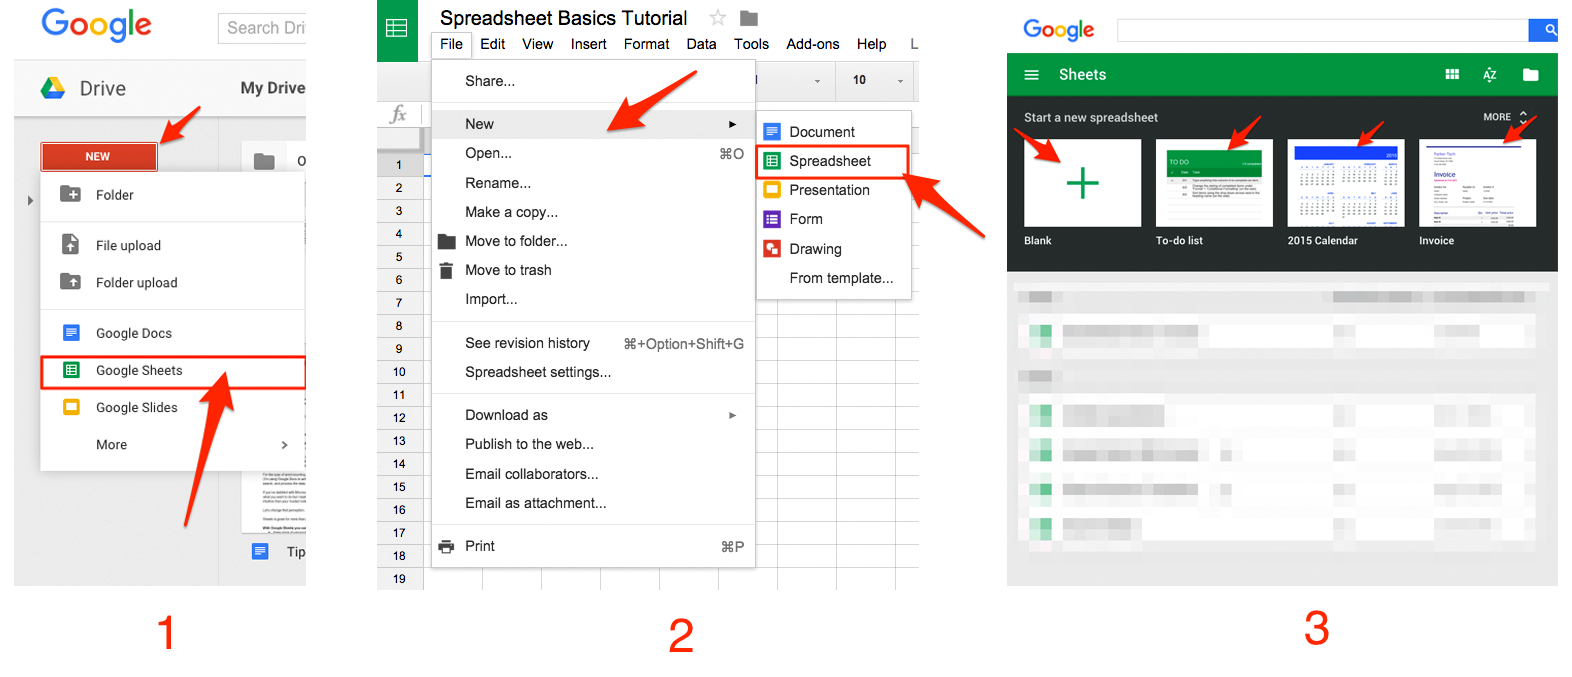 How Do I Make Mailing Labels From A Google Spreadsheet For Google Sheets 101: The Beginner's Guide To Online Spreadsheets  The